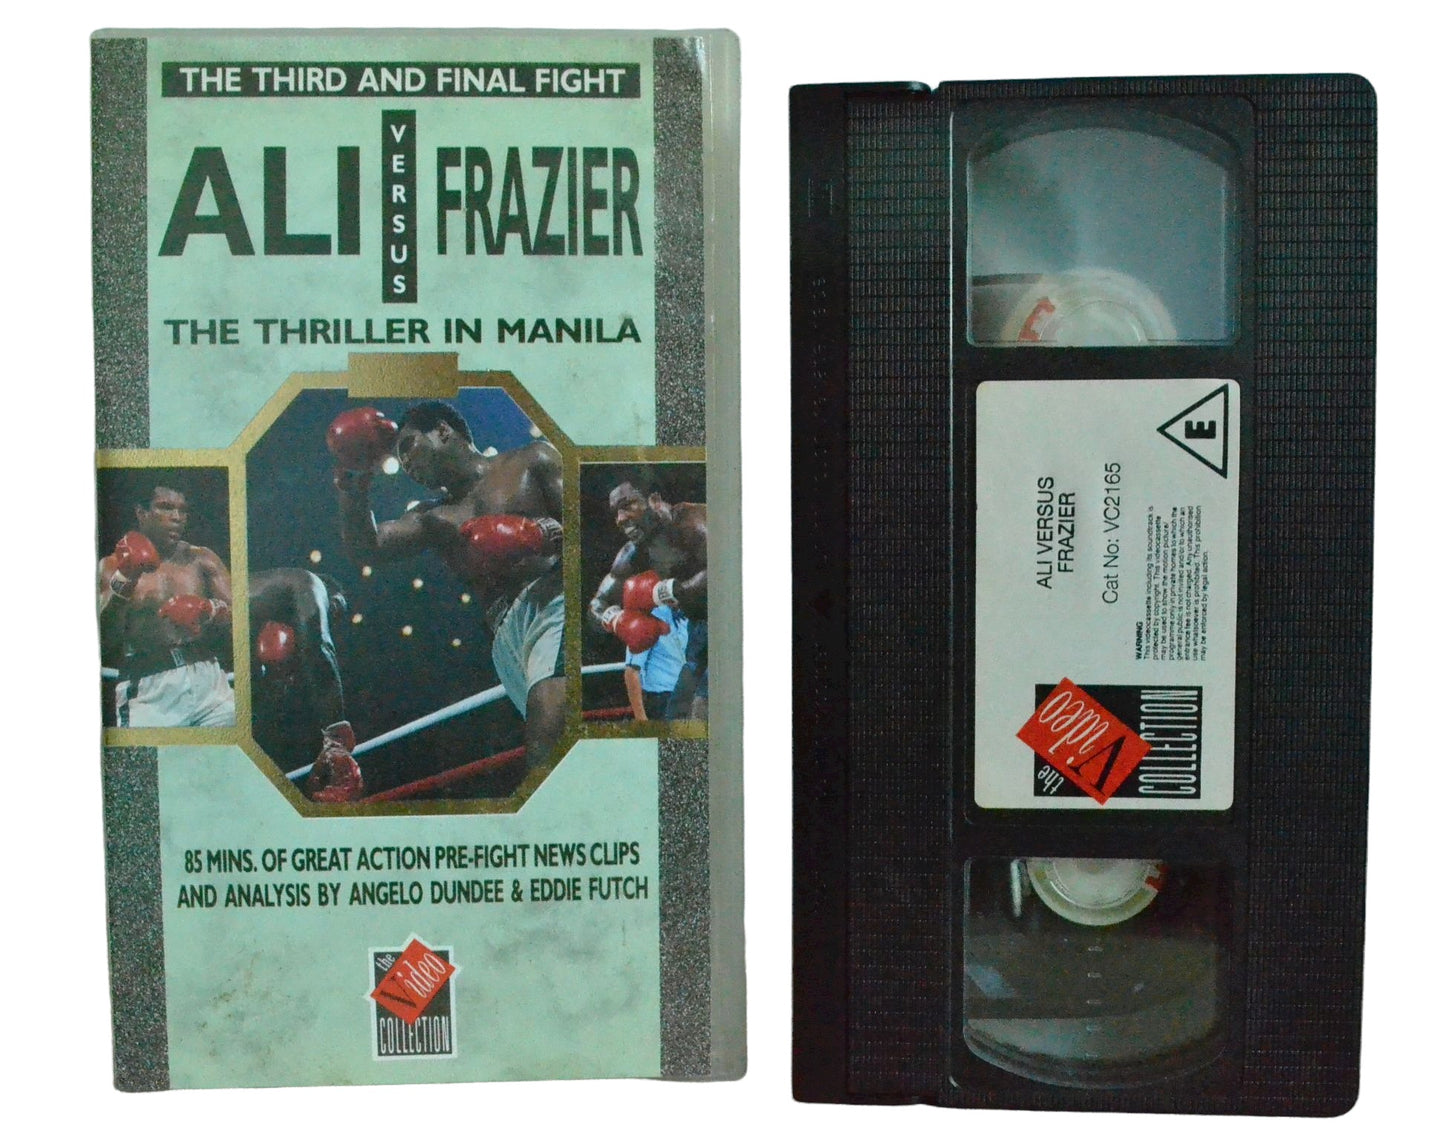 The Third And Final Fight - Ali Versus Frazier - The Thriller In Manila - Muhammed Ali - The Video Collection - Boxing - Pal VHS-